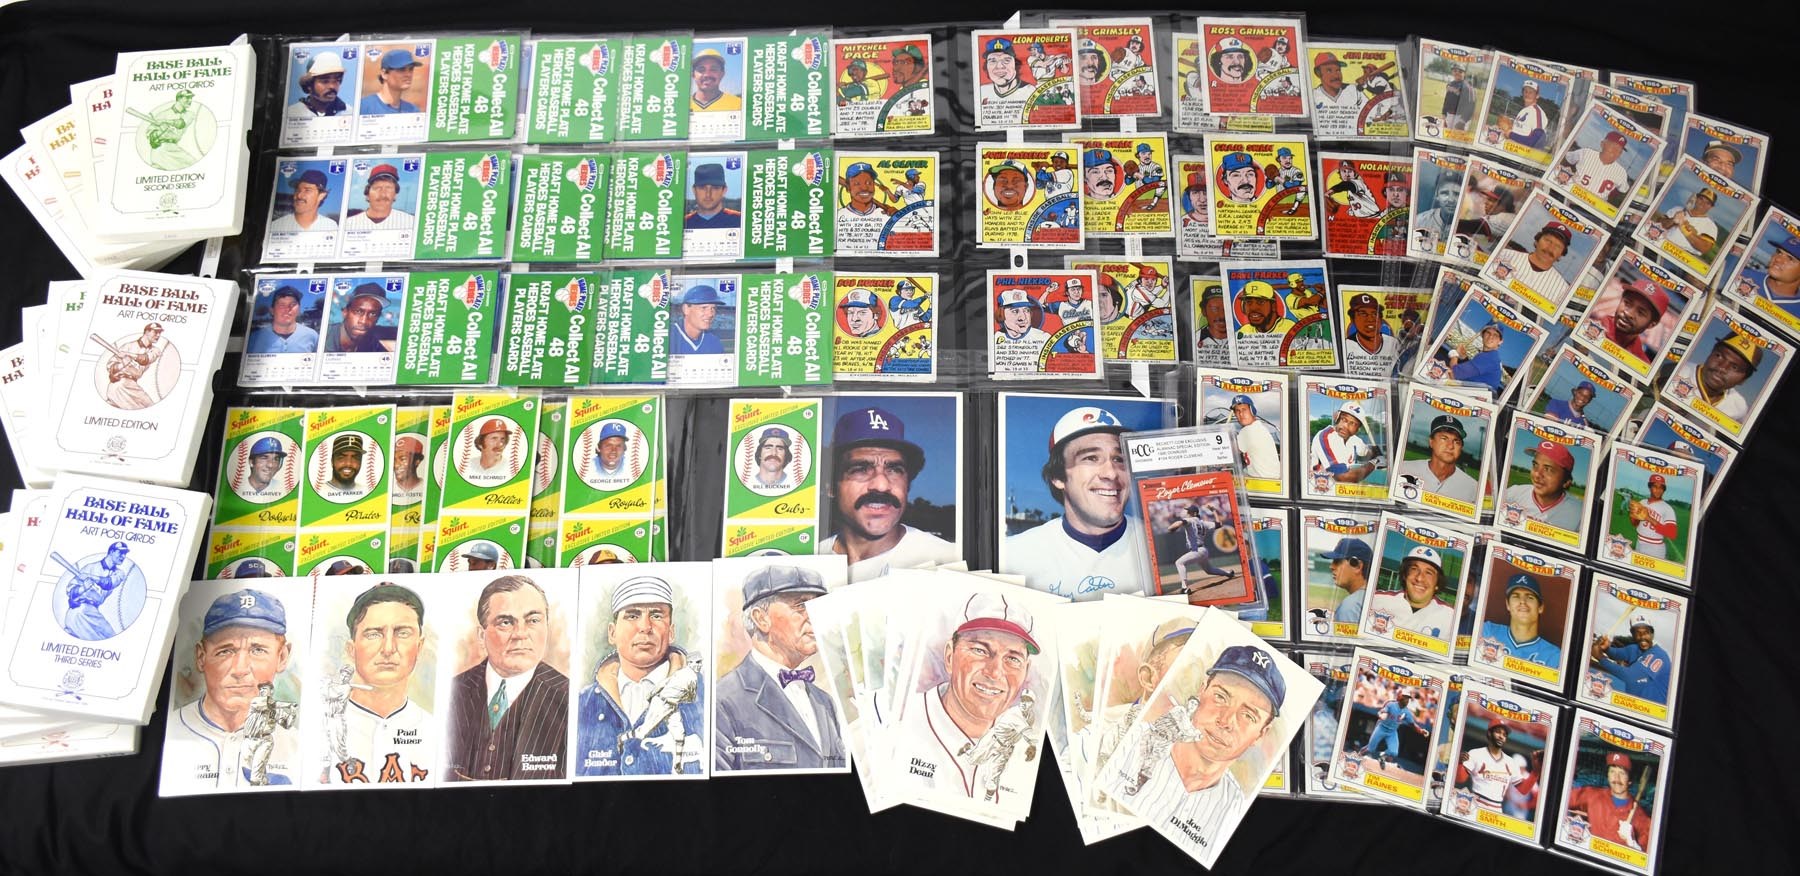 - 1980s Baseball Card Collection with Signed Cards & Partial Perez Steele Set (#1153)